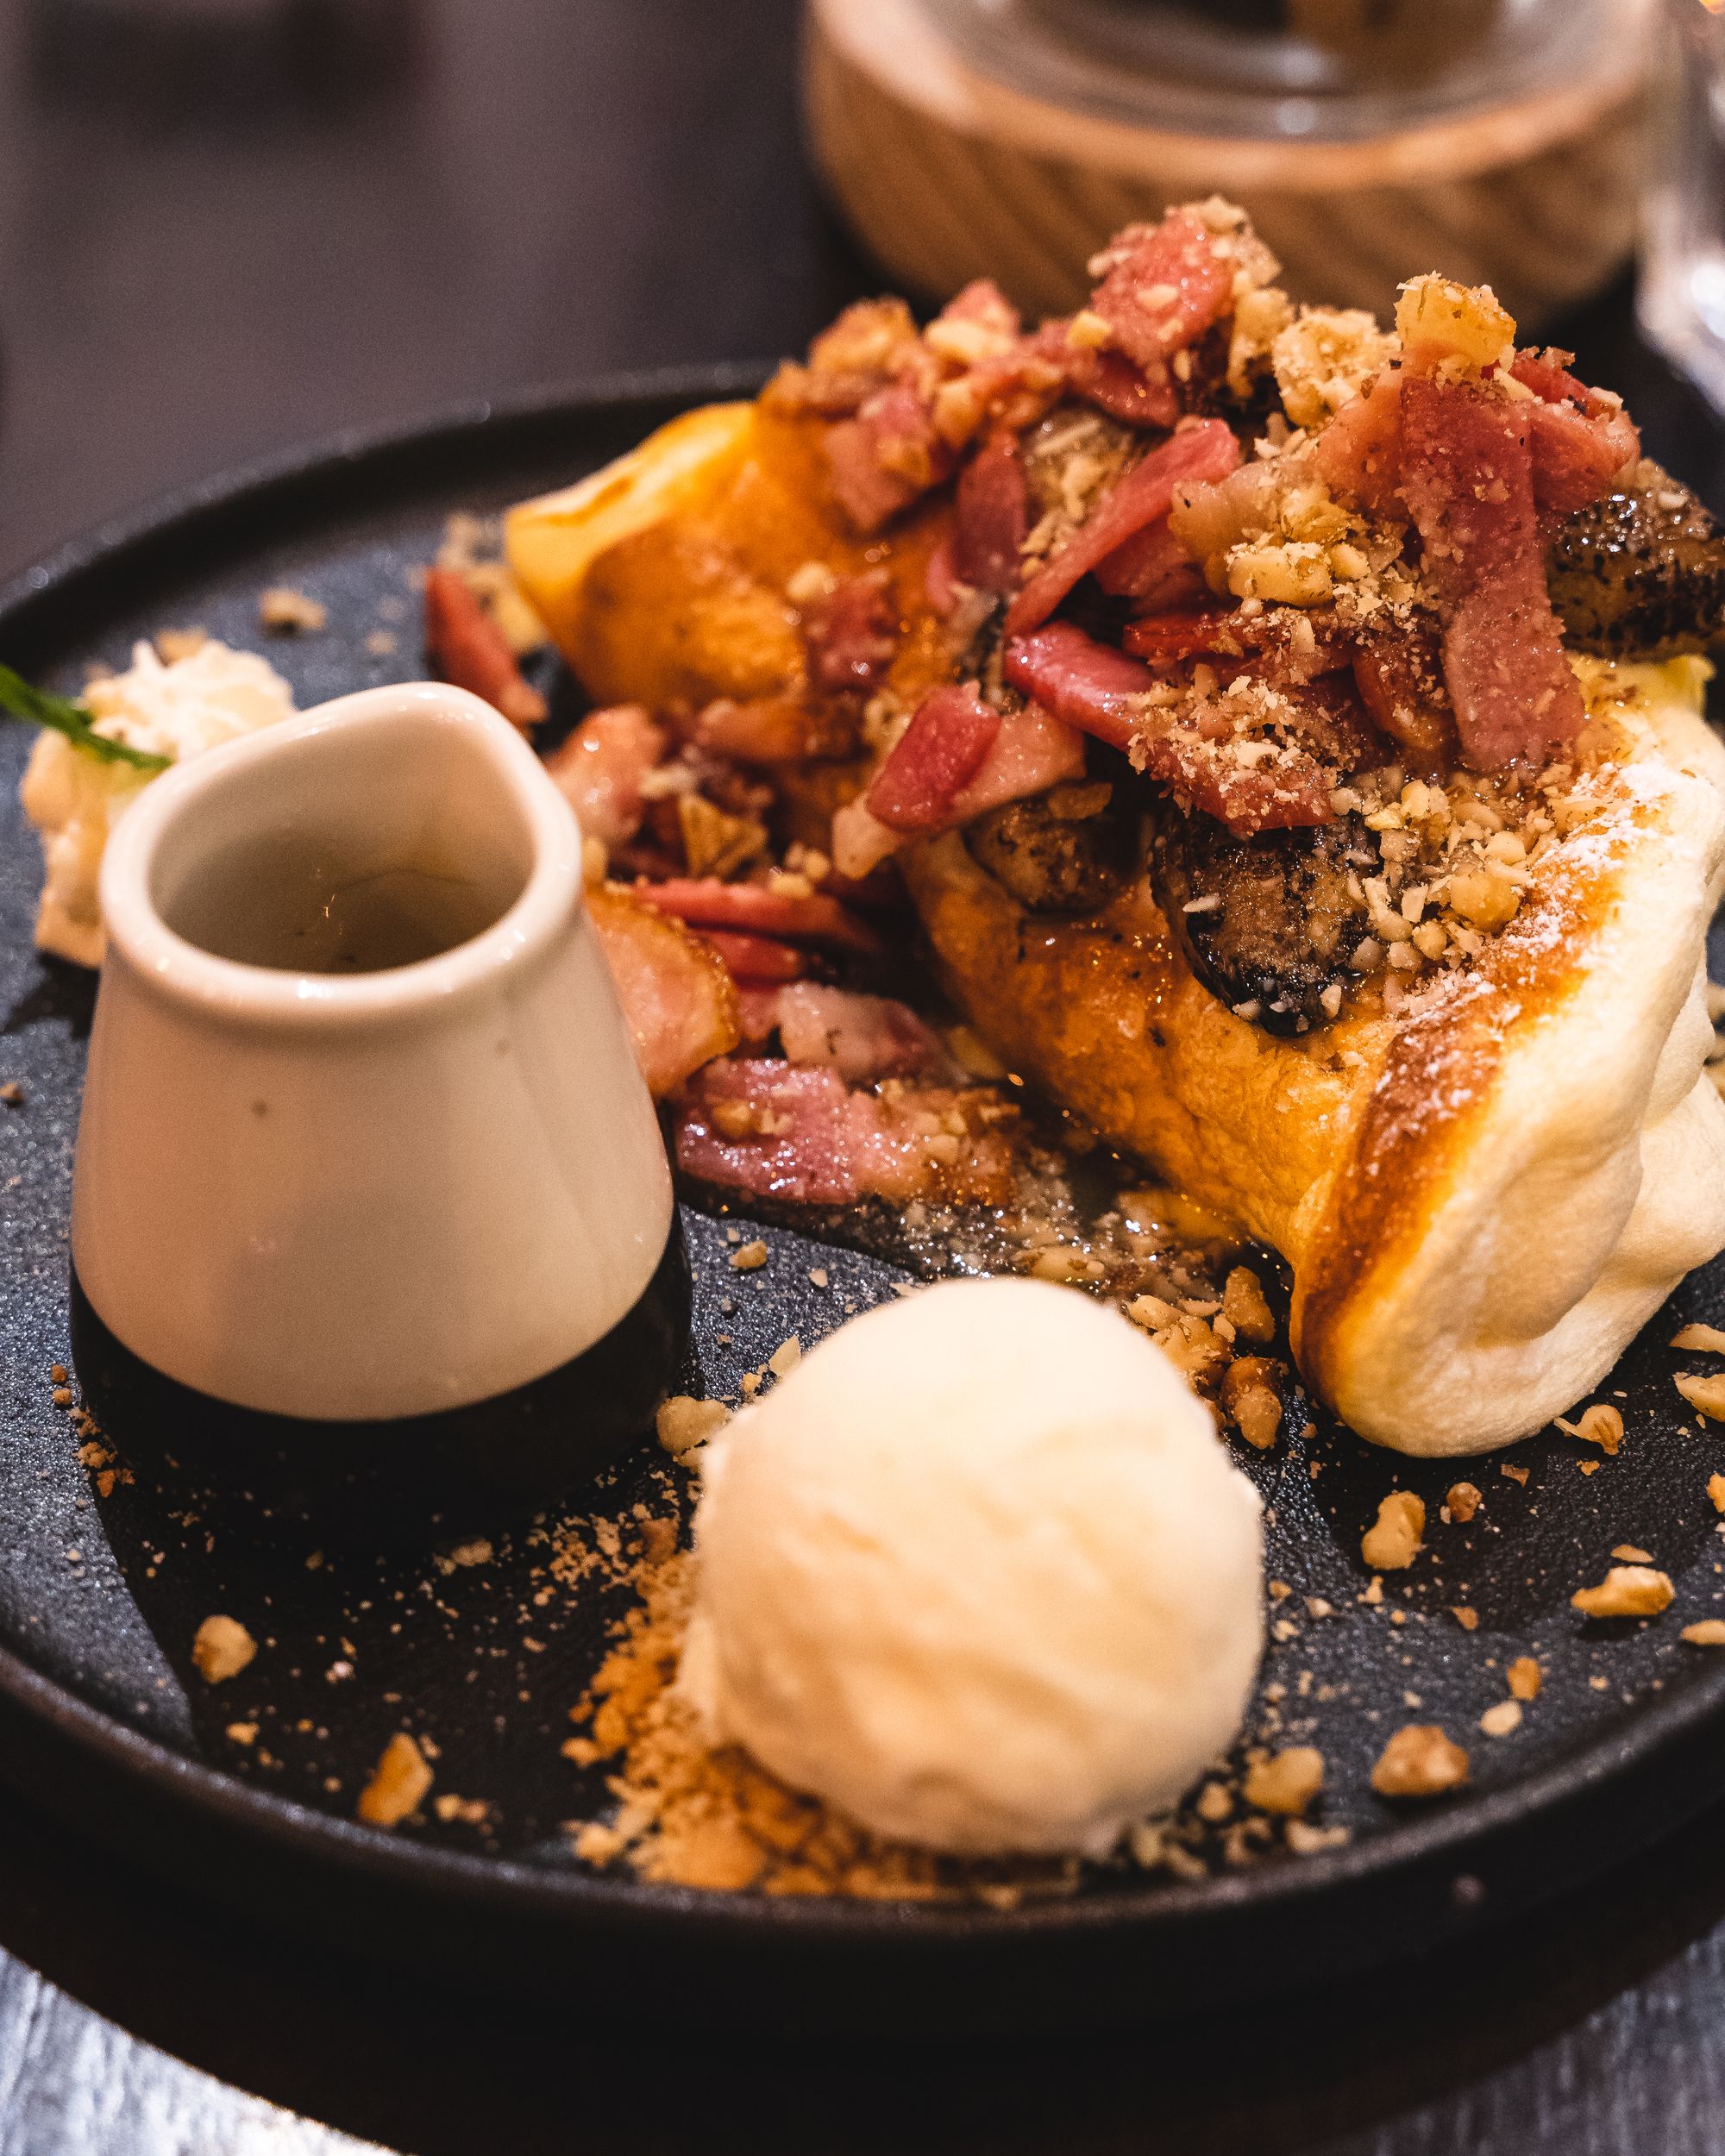 Plate with souffle pancakes topped with caramelised banana and bacon, with a side of ice-cream and honey